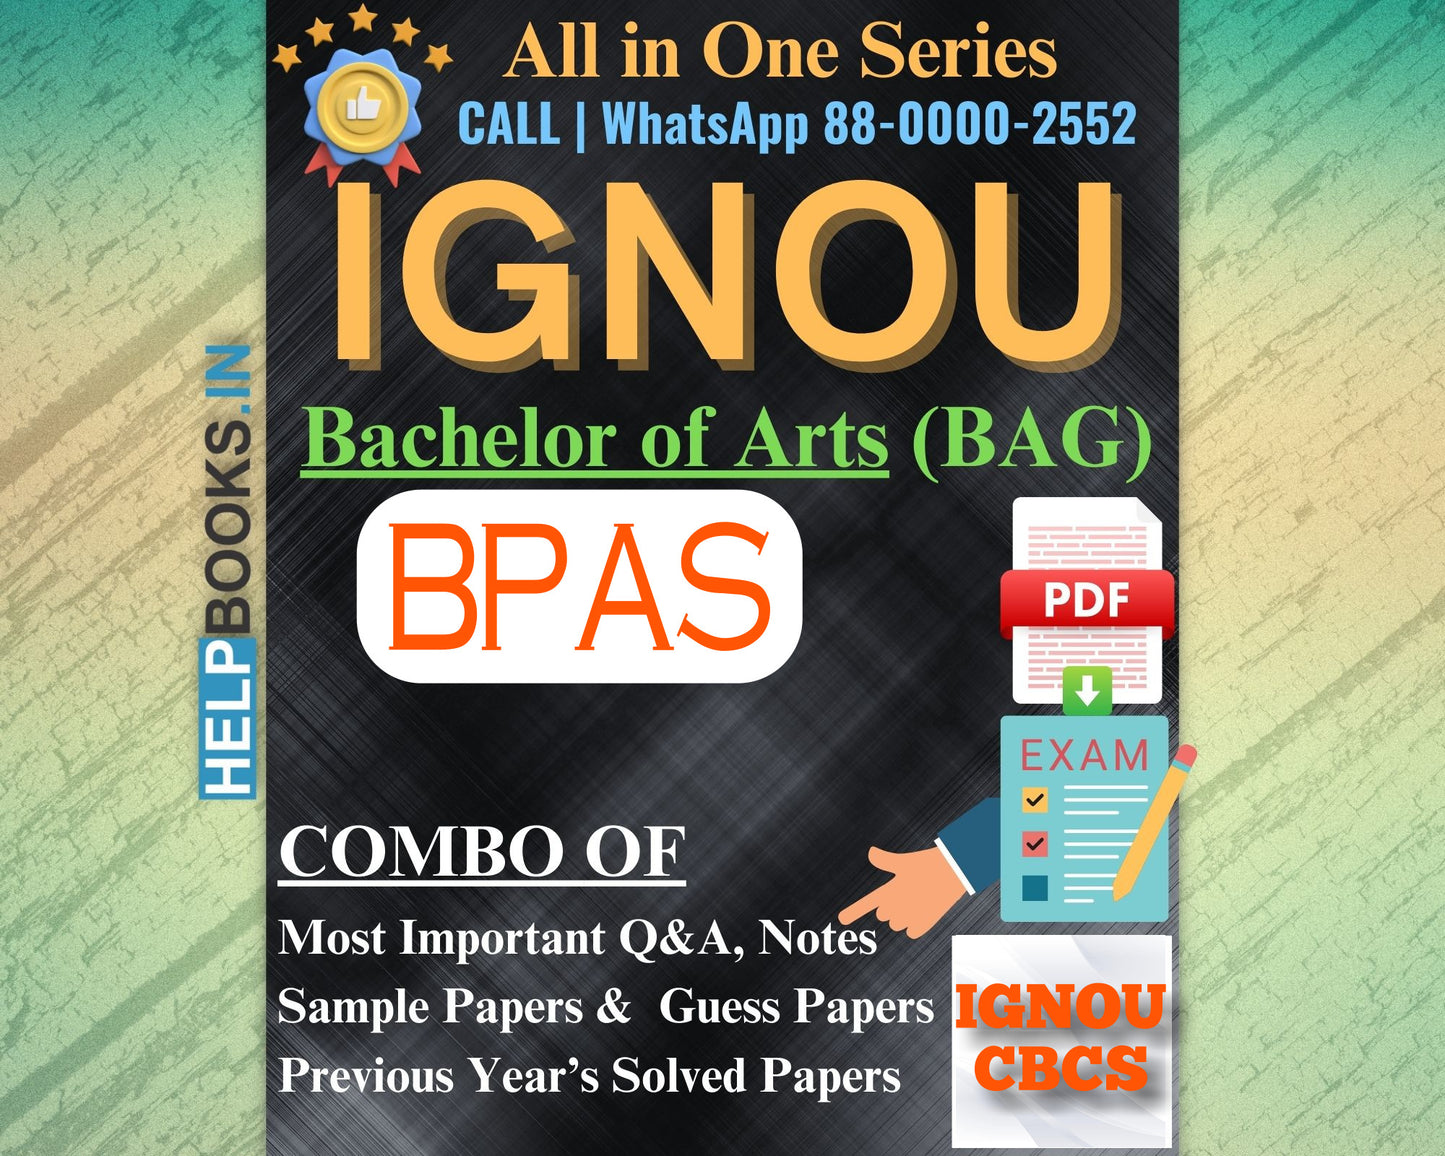 IGNOU BAG Online Study Package: Bachelor of Arts (BA) - Previous Year’s Solved Papers, Q&A, Exam Notes, Sample Papers, Guess Papers-BPAS184, BPAS186